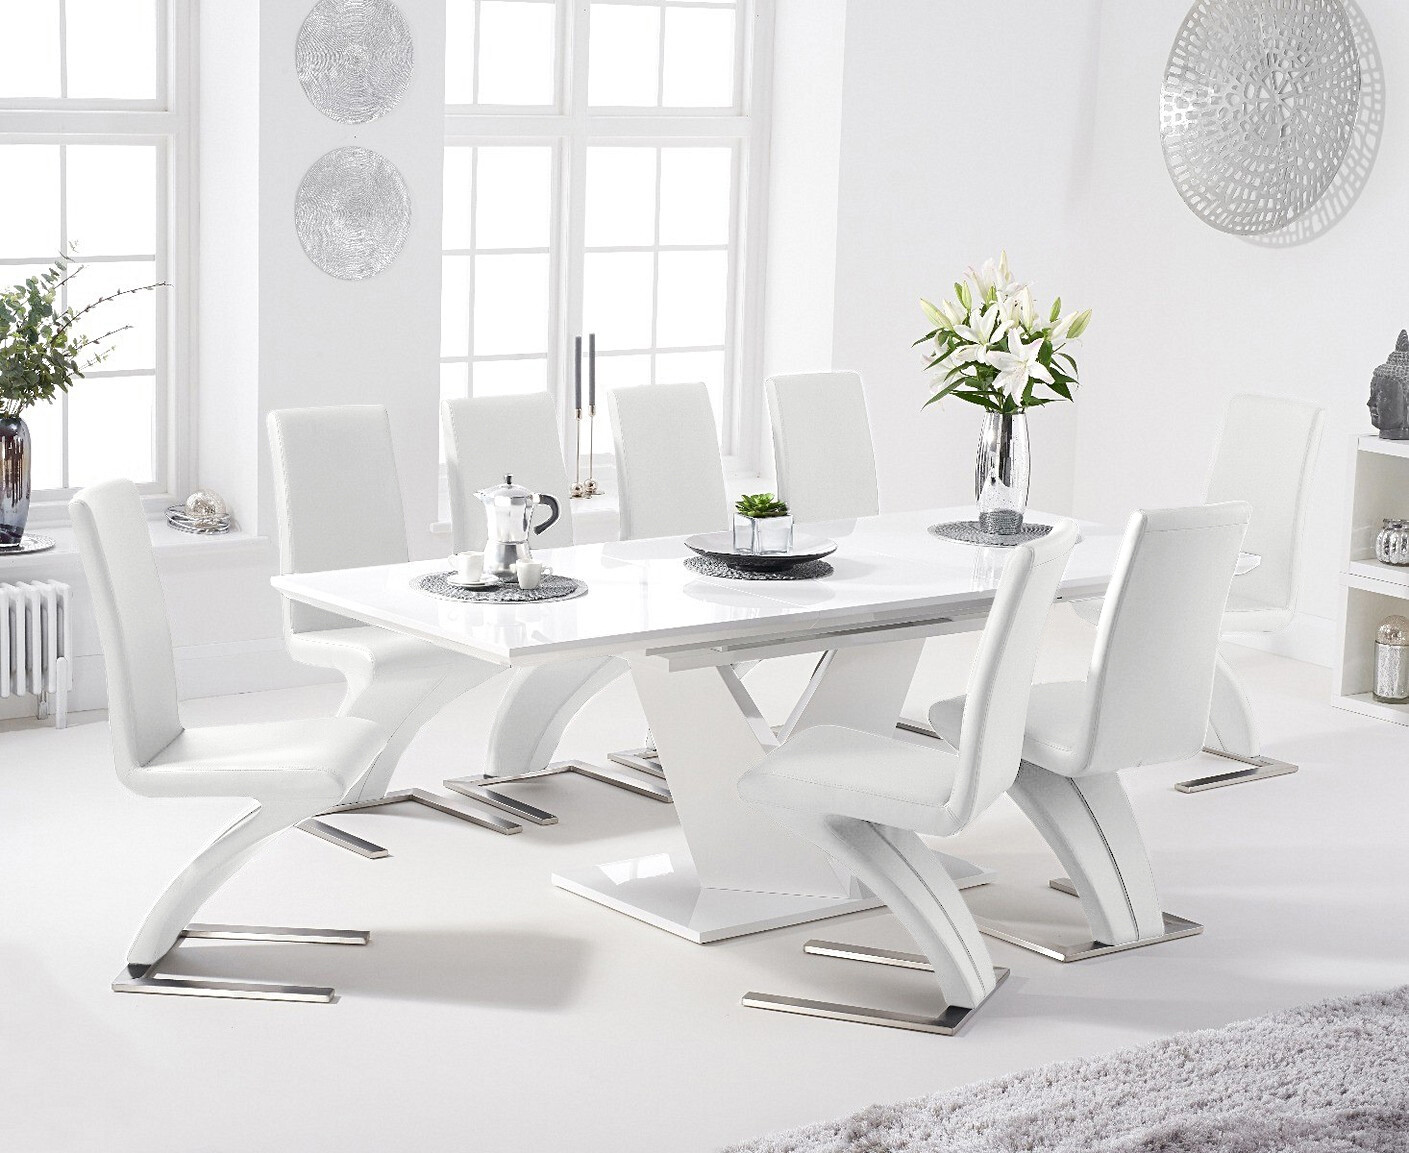 Extending Vittorio 160cm White High Gloss Dining Table With 10 White Aldo Faux Leather Chairs